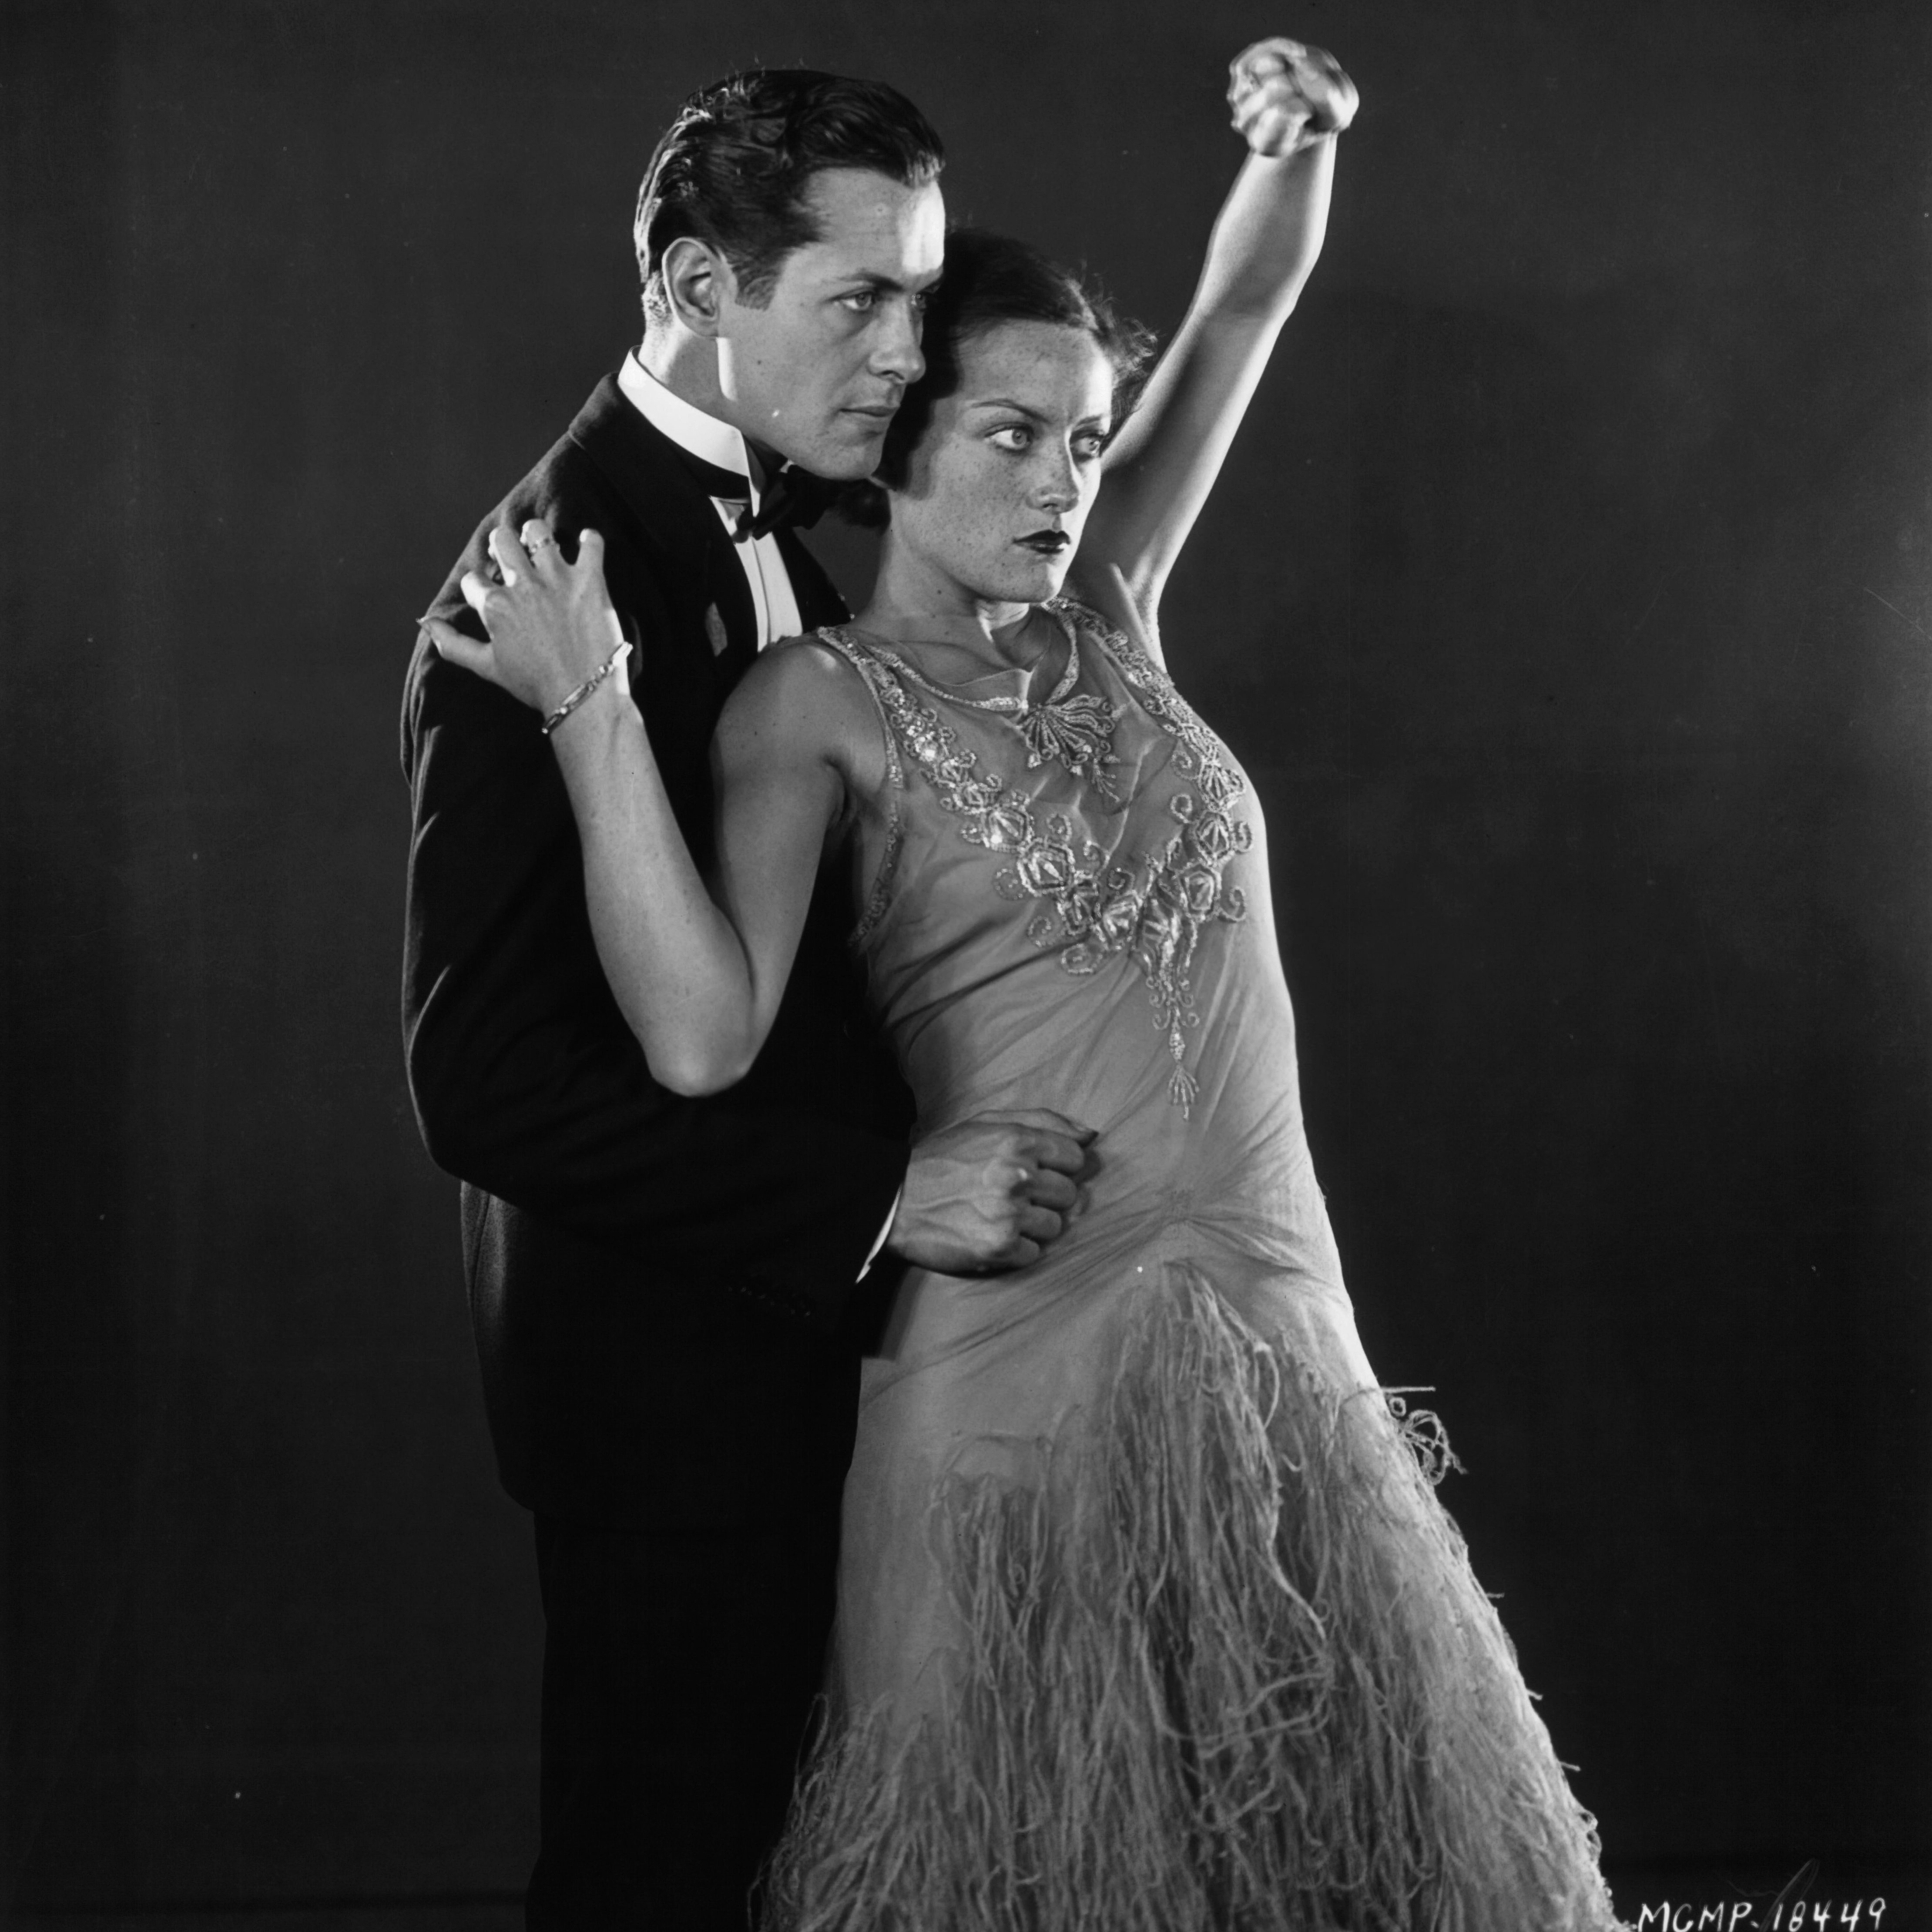 Robert Montgomery dances with Joan Crawford in a publicity portrait for Untamed, 1929